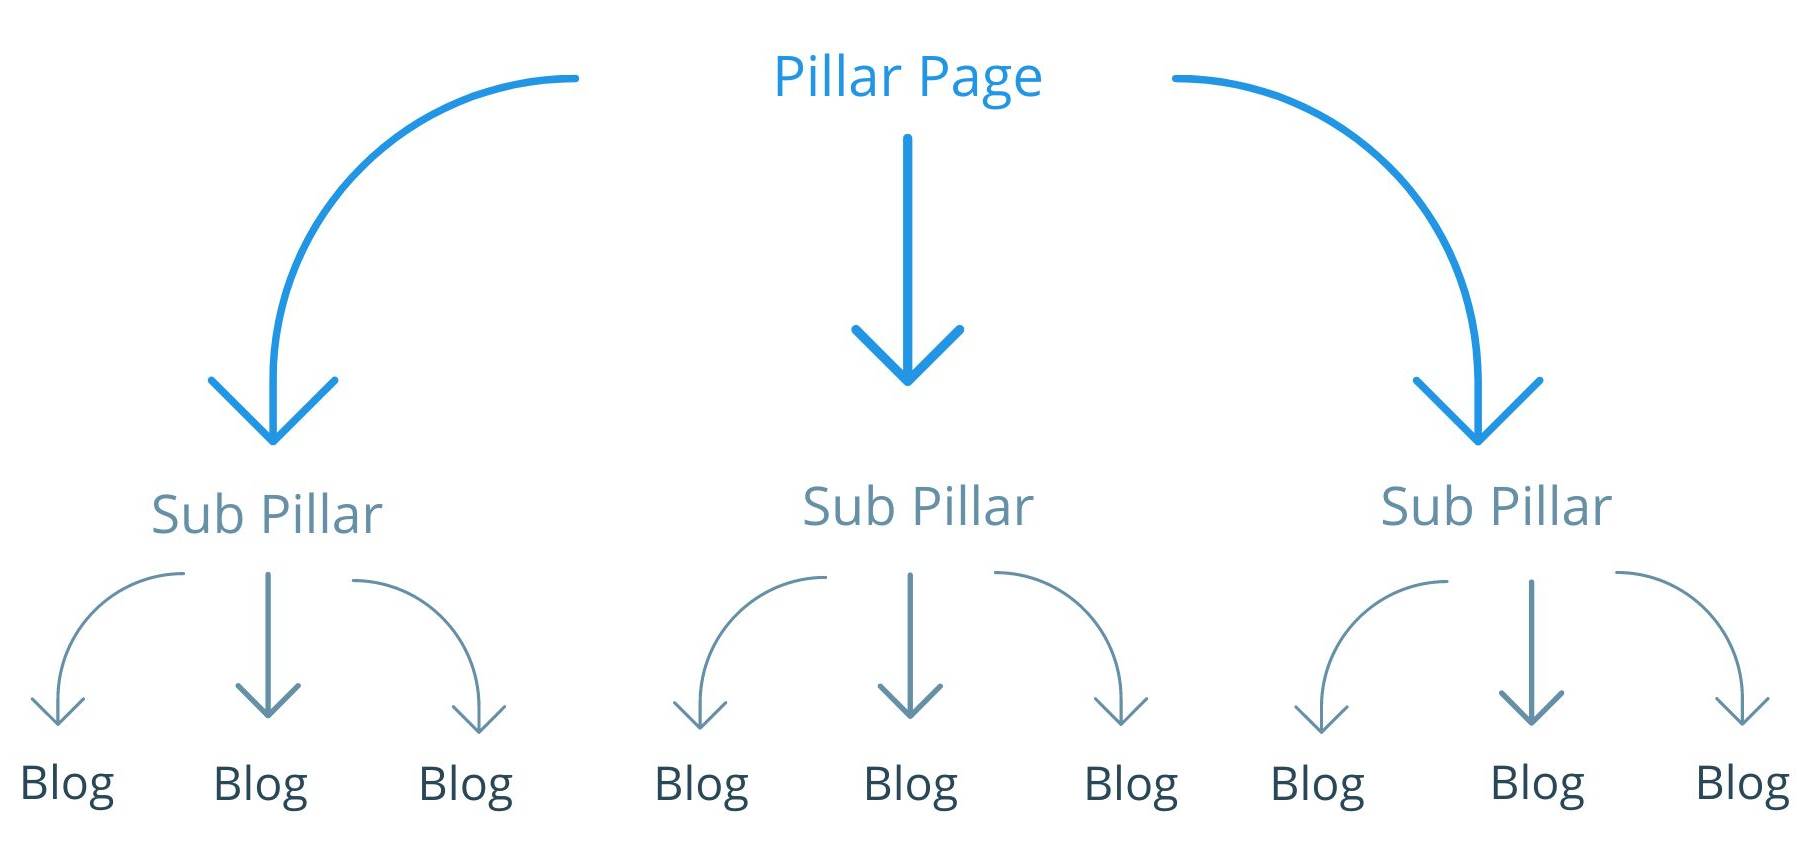 This image shows the pillar strategy and how many content pillars you should have